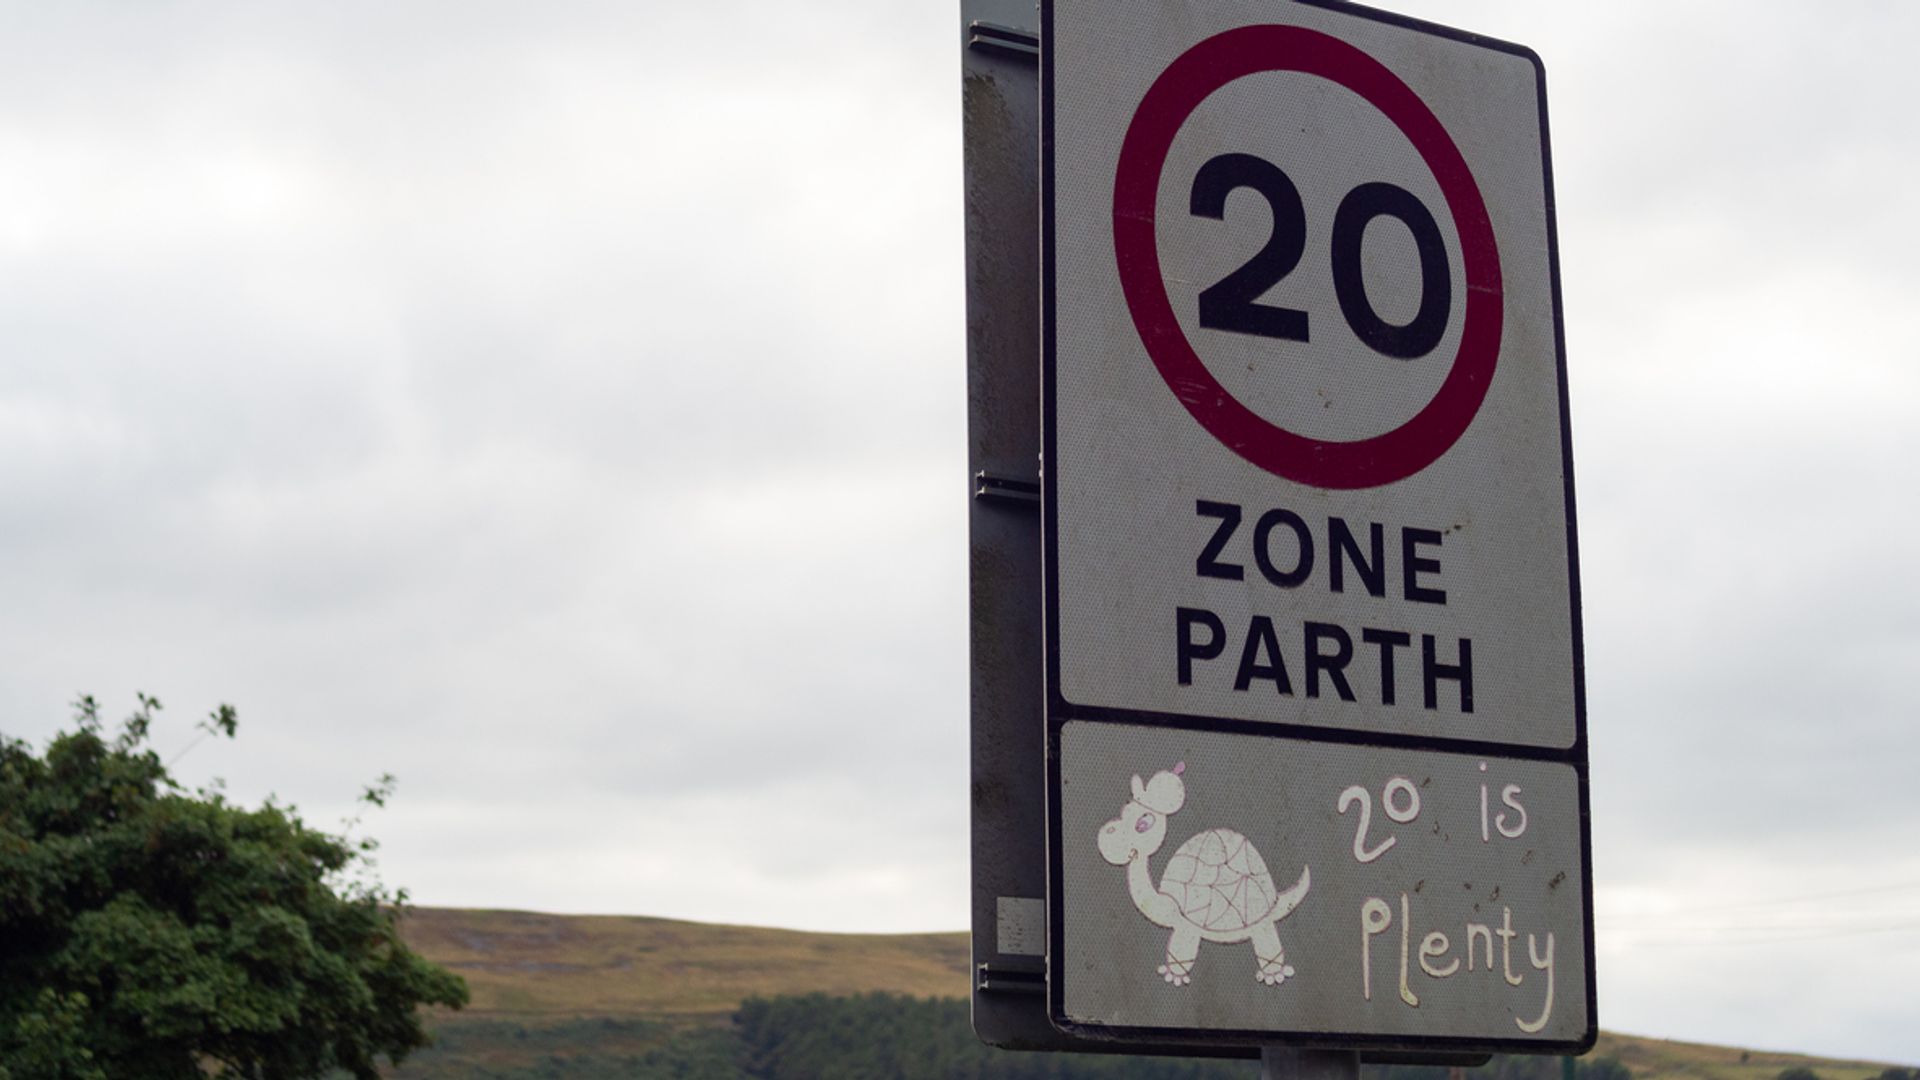 Wales to roll back 20mph speed limit on some roads after backlash